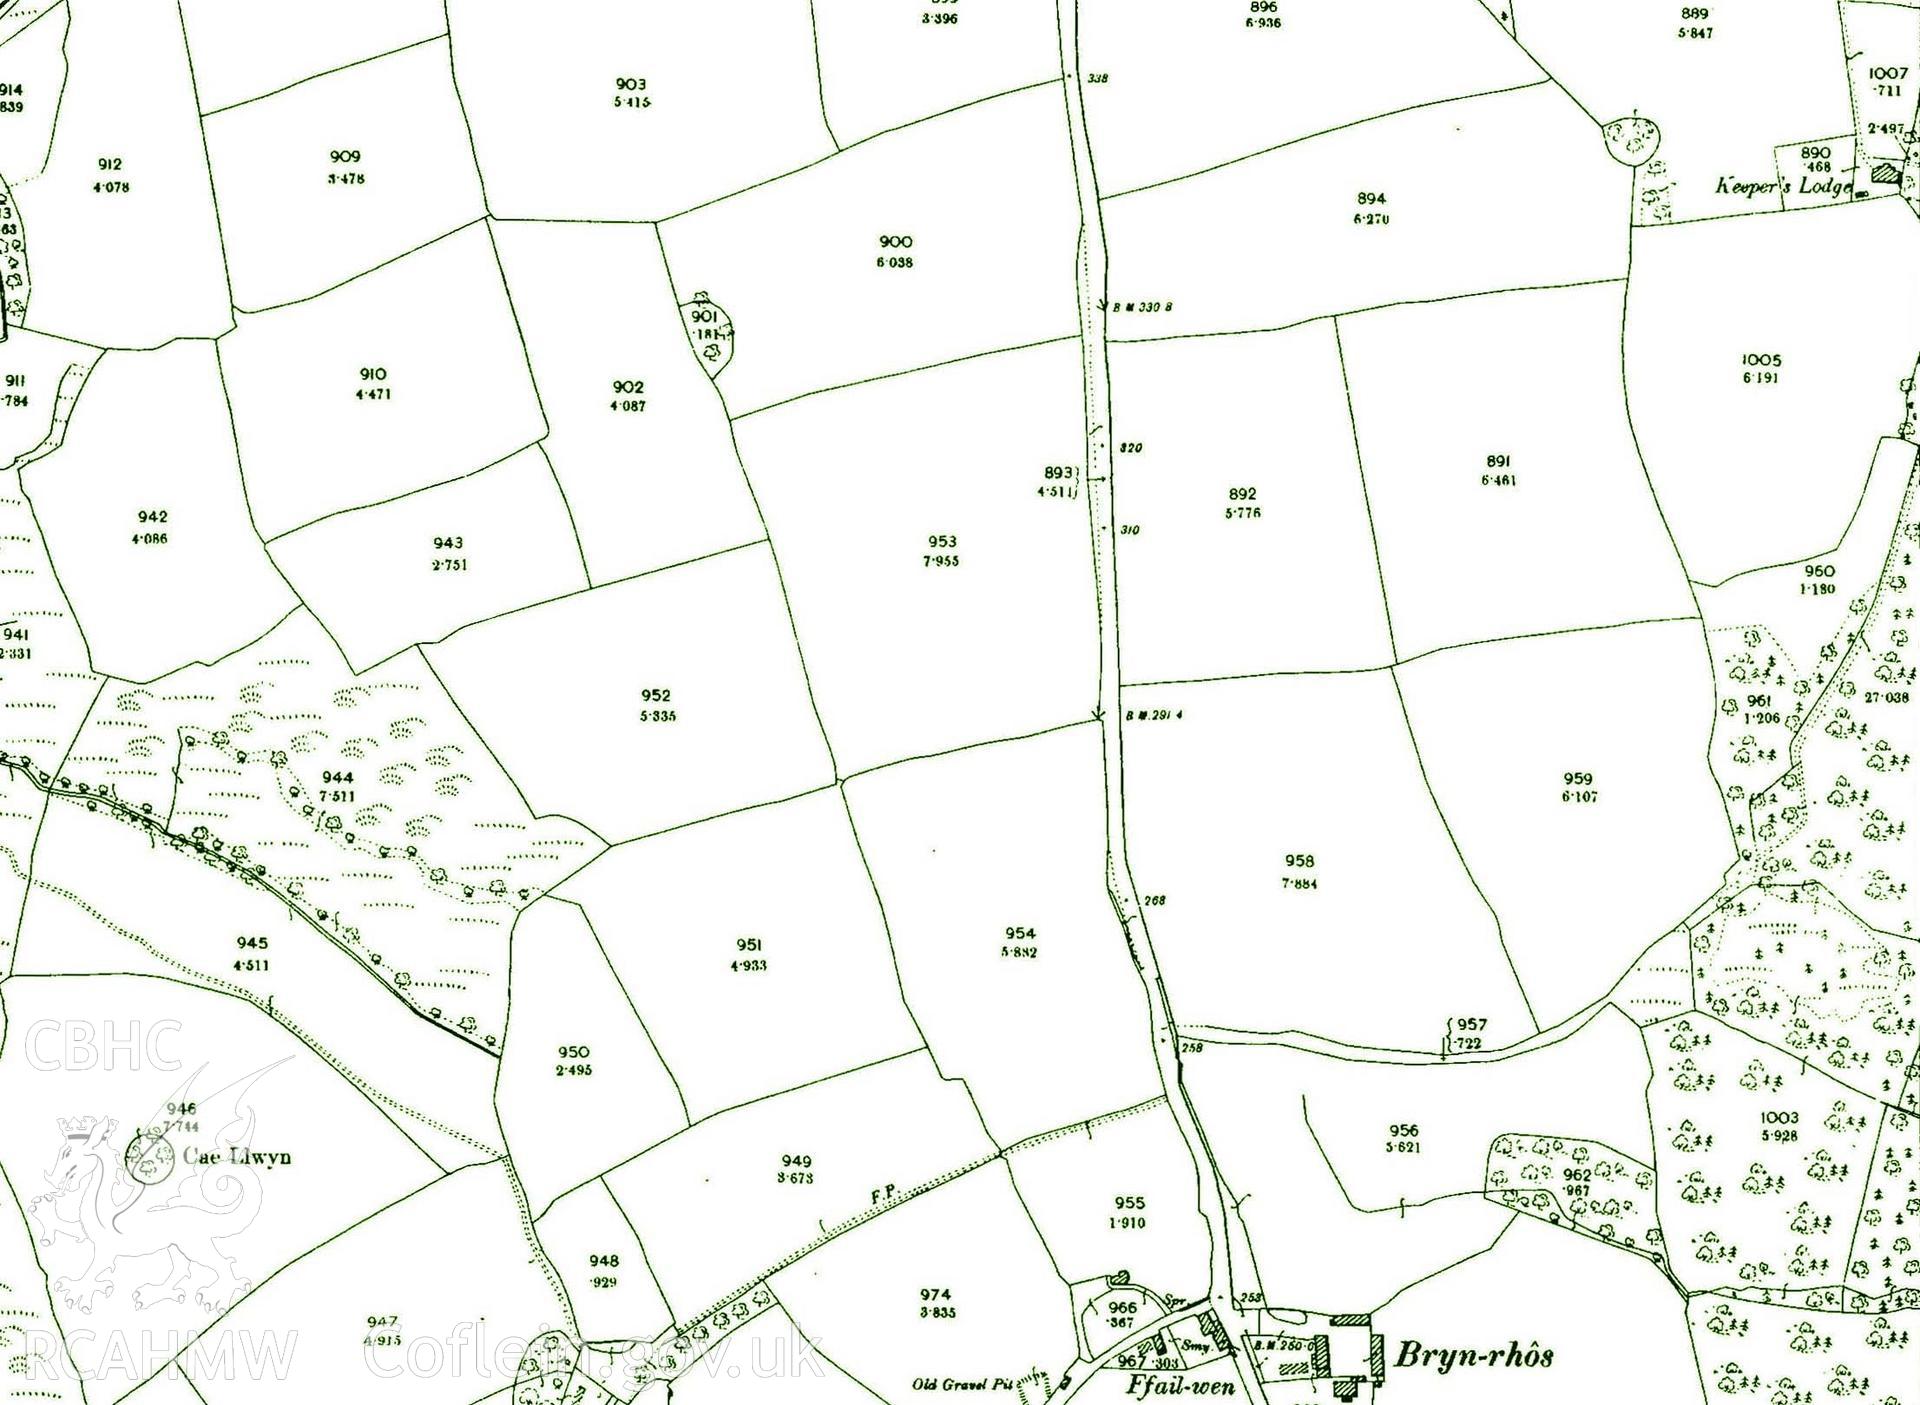 Digital copy of part of OS map sheet XIV. 11M. It depicts part of the Penllergare Estate.